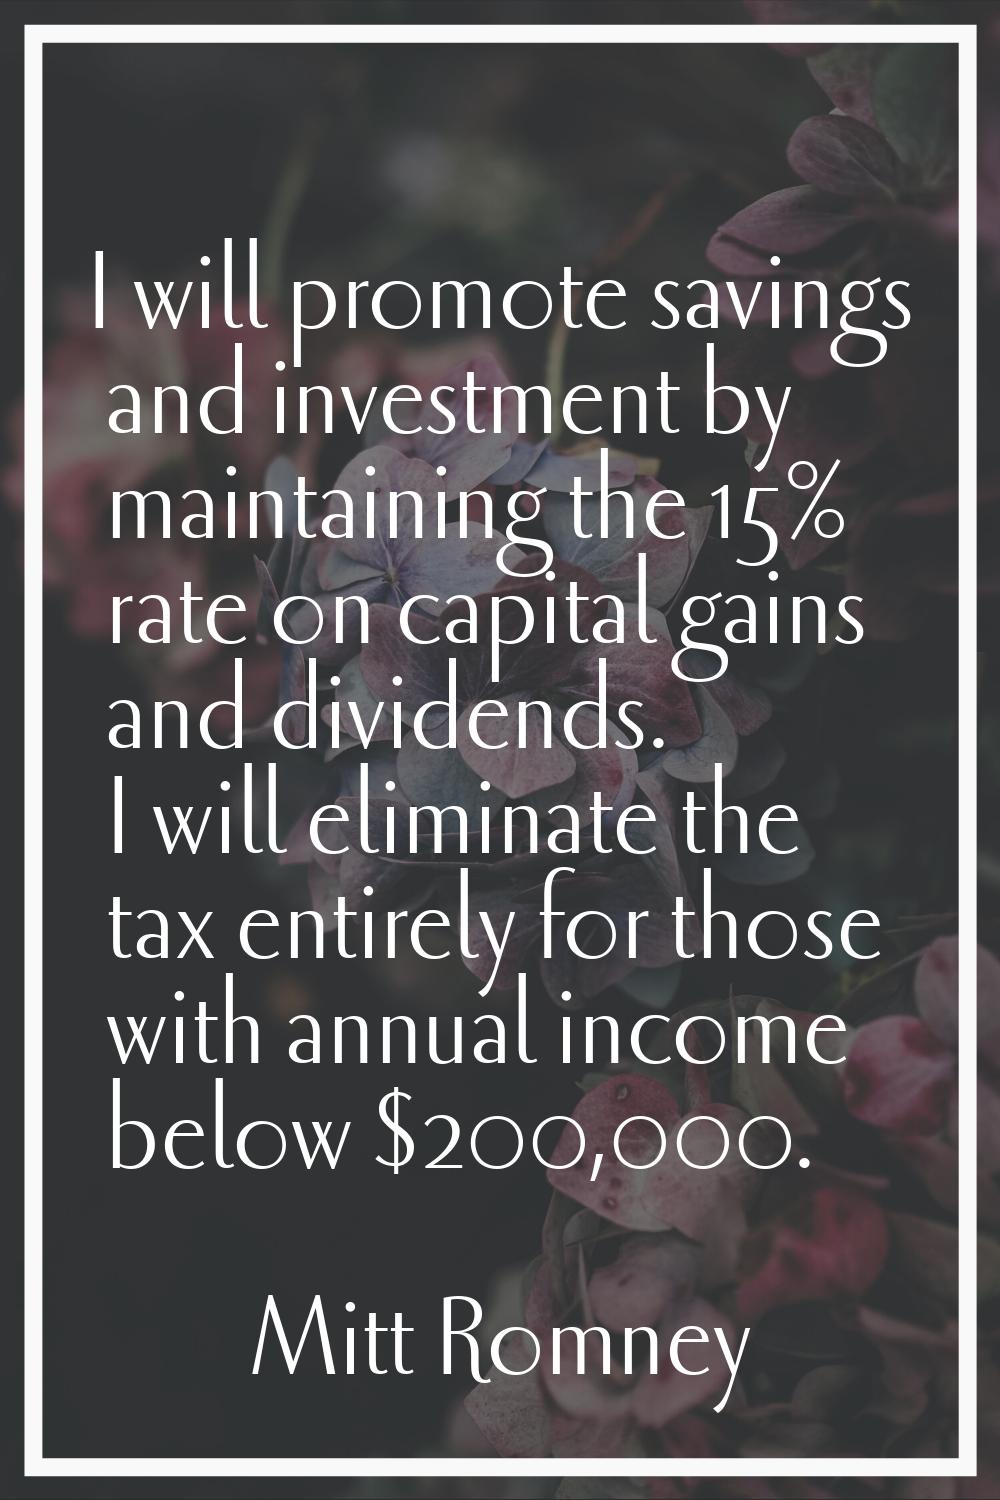 I will promote savings and investment by maintaining the 15% rate on capital gains and dividends. I